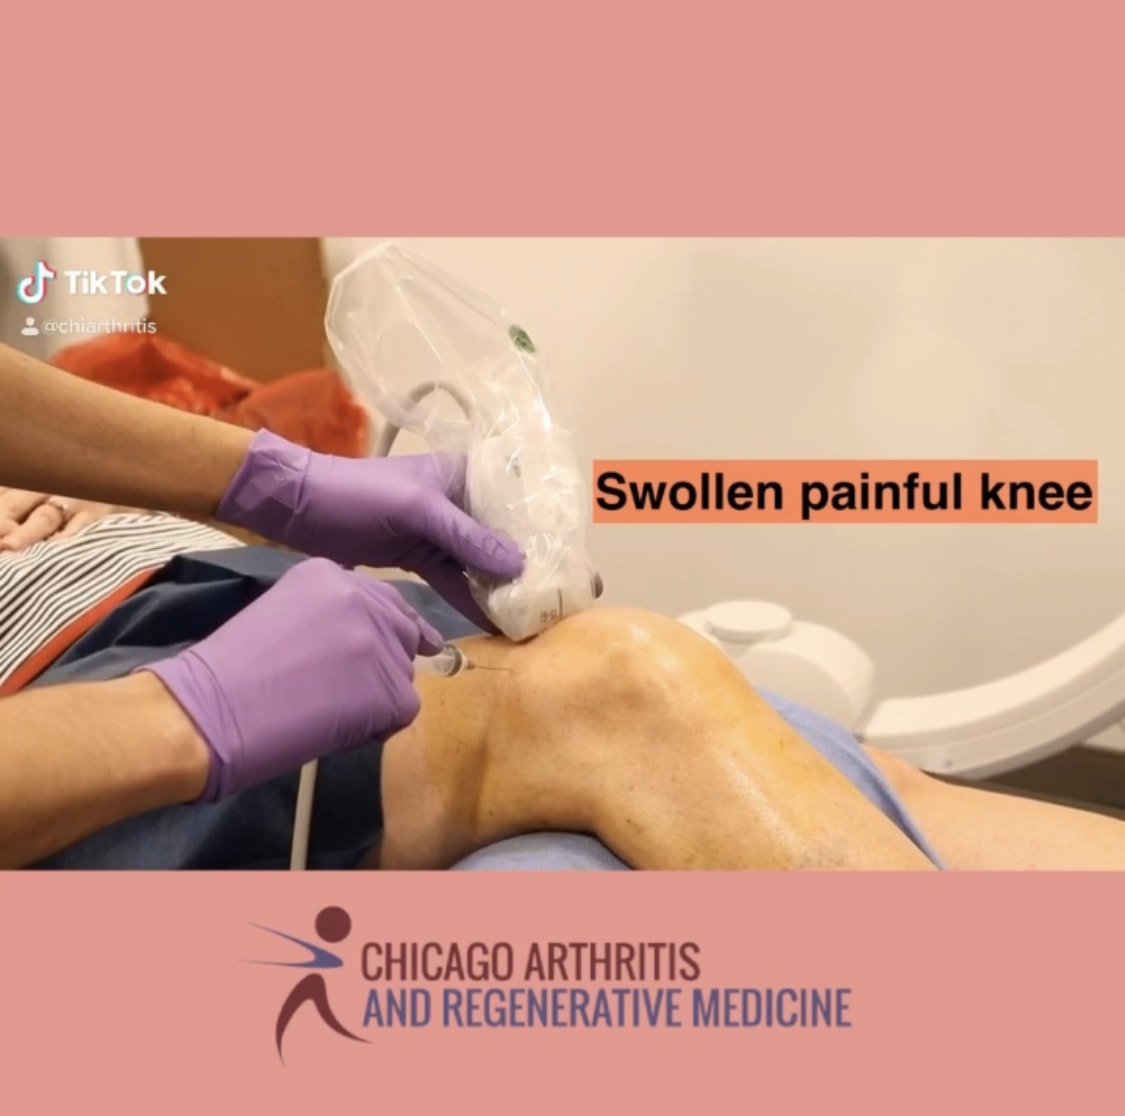 How to treat a Painful Swollen Knee